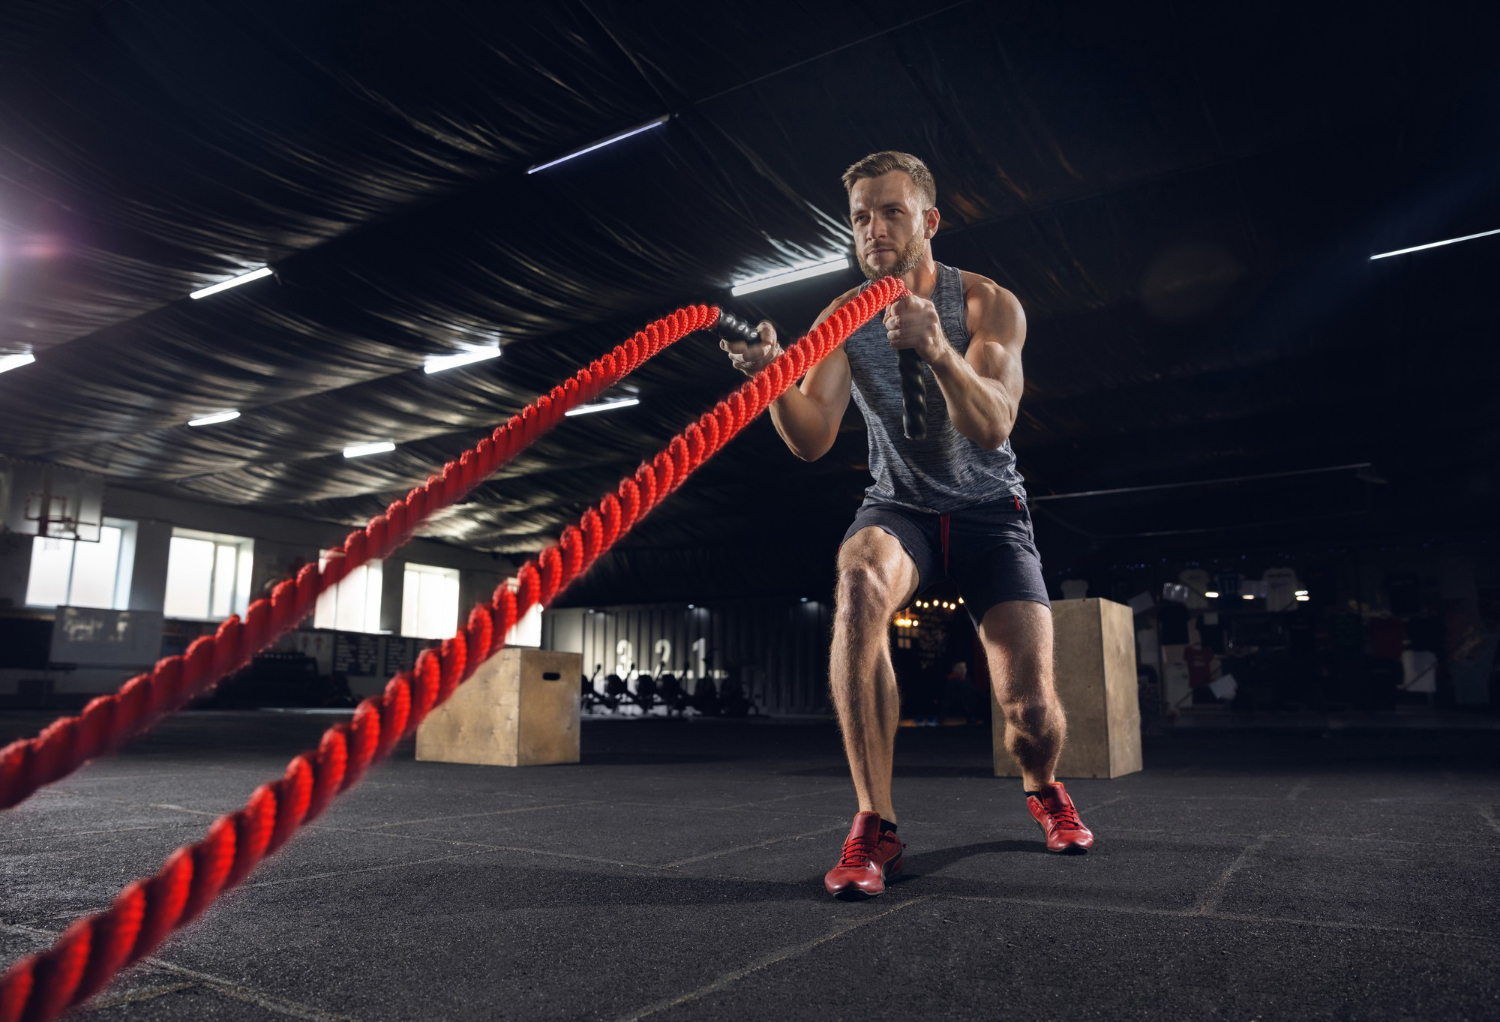 young-healthy-man-athlete-doing-exercise-with-ropes-gym-single-male-model-practicing-hard-training-his-upper-body-concept-healthy-lifestyle-sport-fitness-bodybuilding-wellbeing